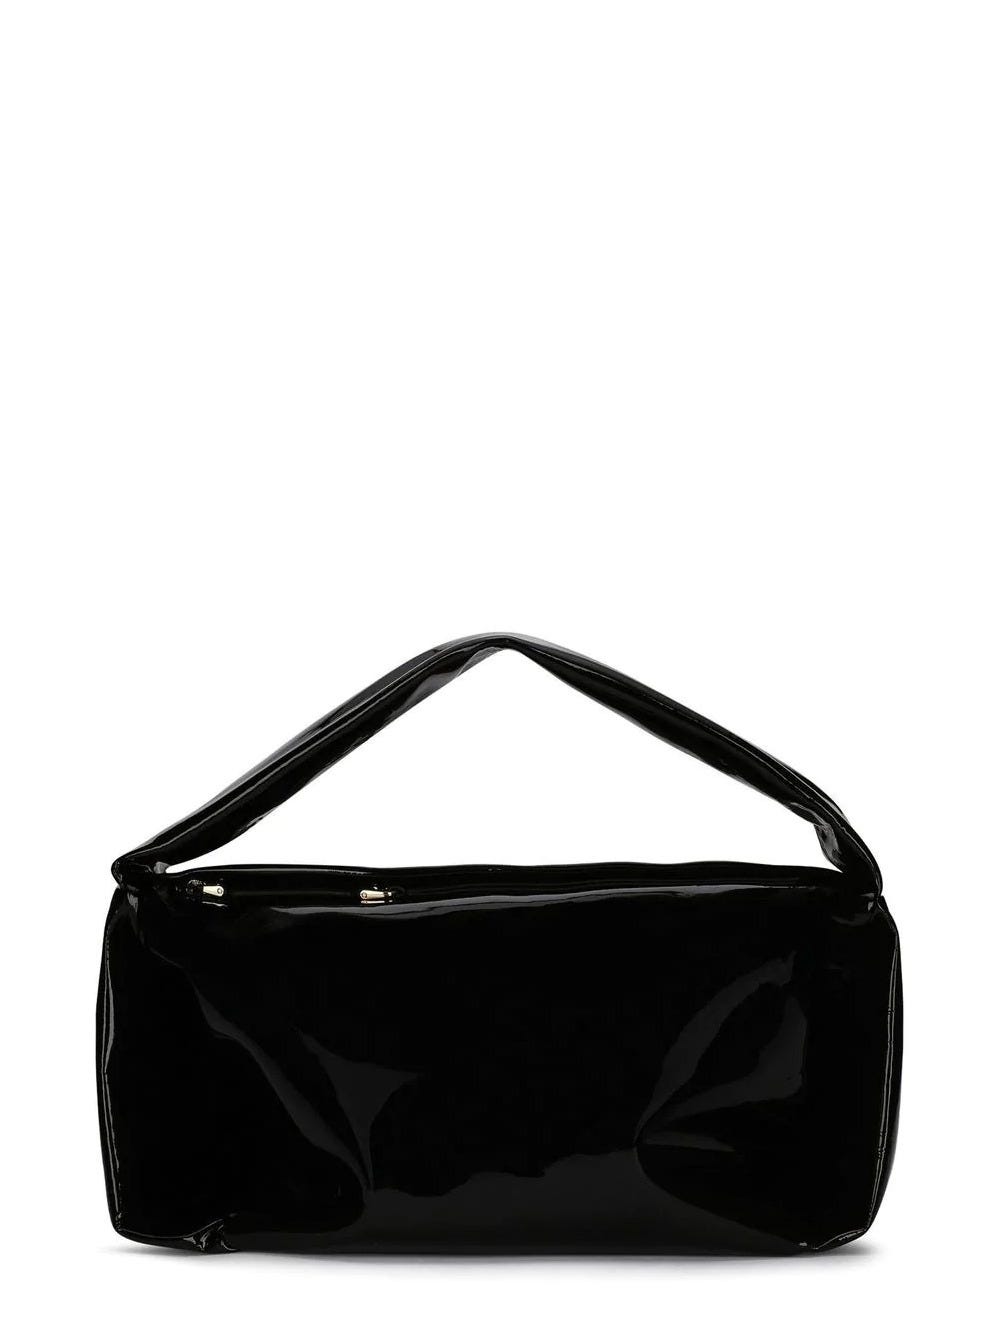 DOLCE & GABBANA BLACK SOFT PATENT LEATHER BAG WITH LOGO PLAQUE